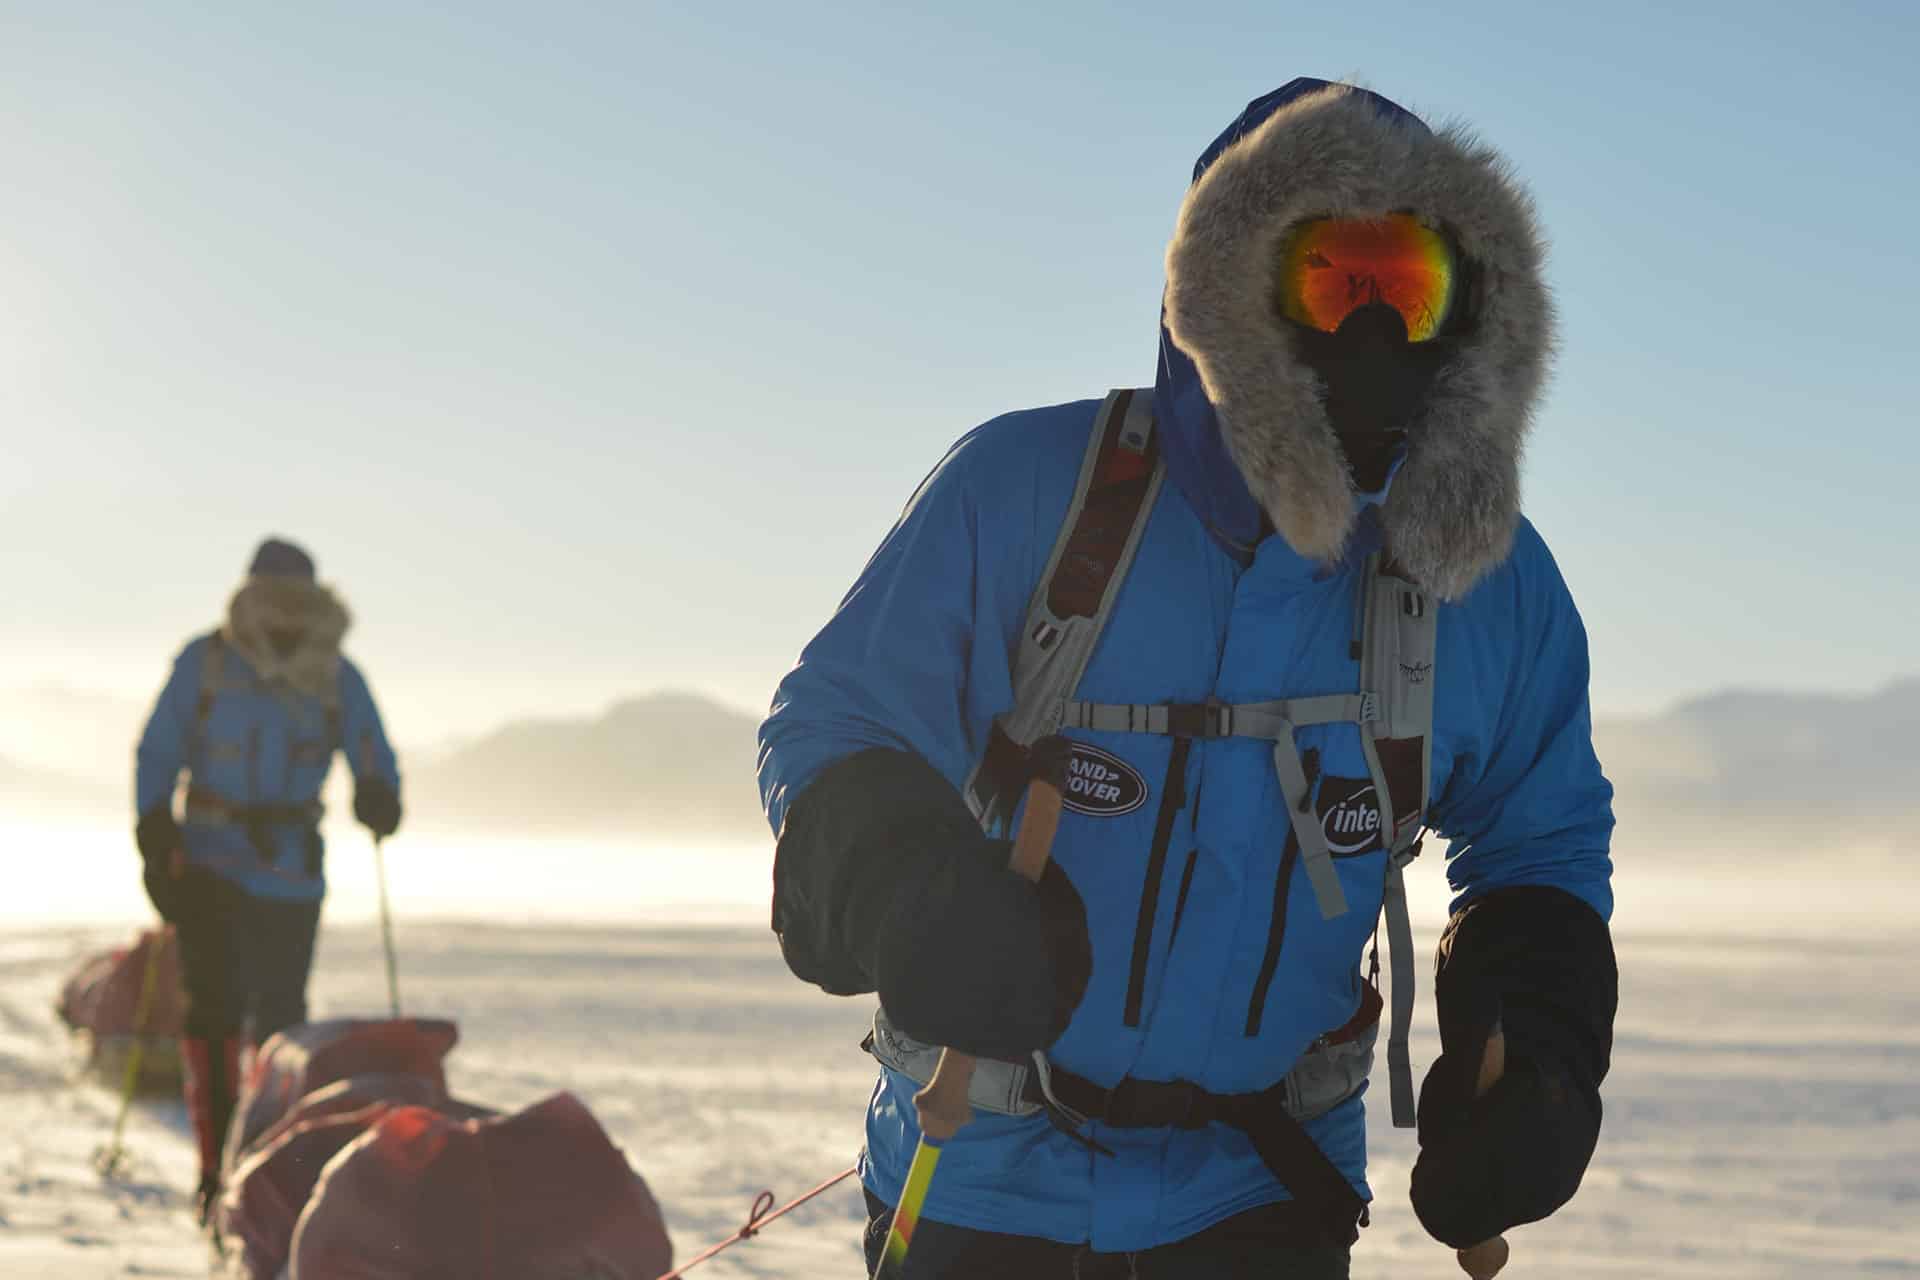 Ben Saunders and Tarka L’Herpiniere on their world record-breaking polar journey to the South Pole and back.